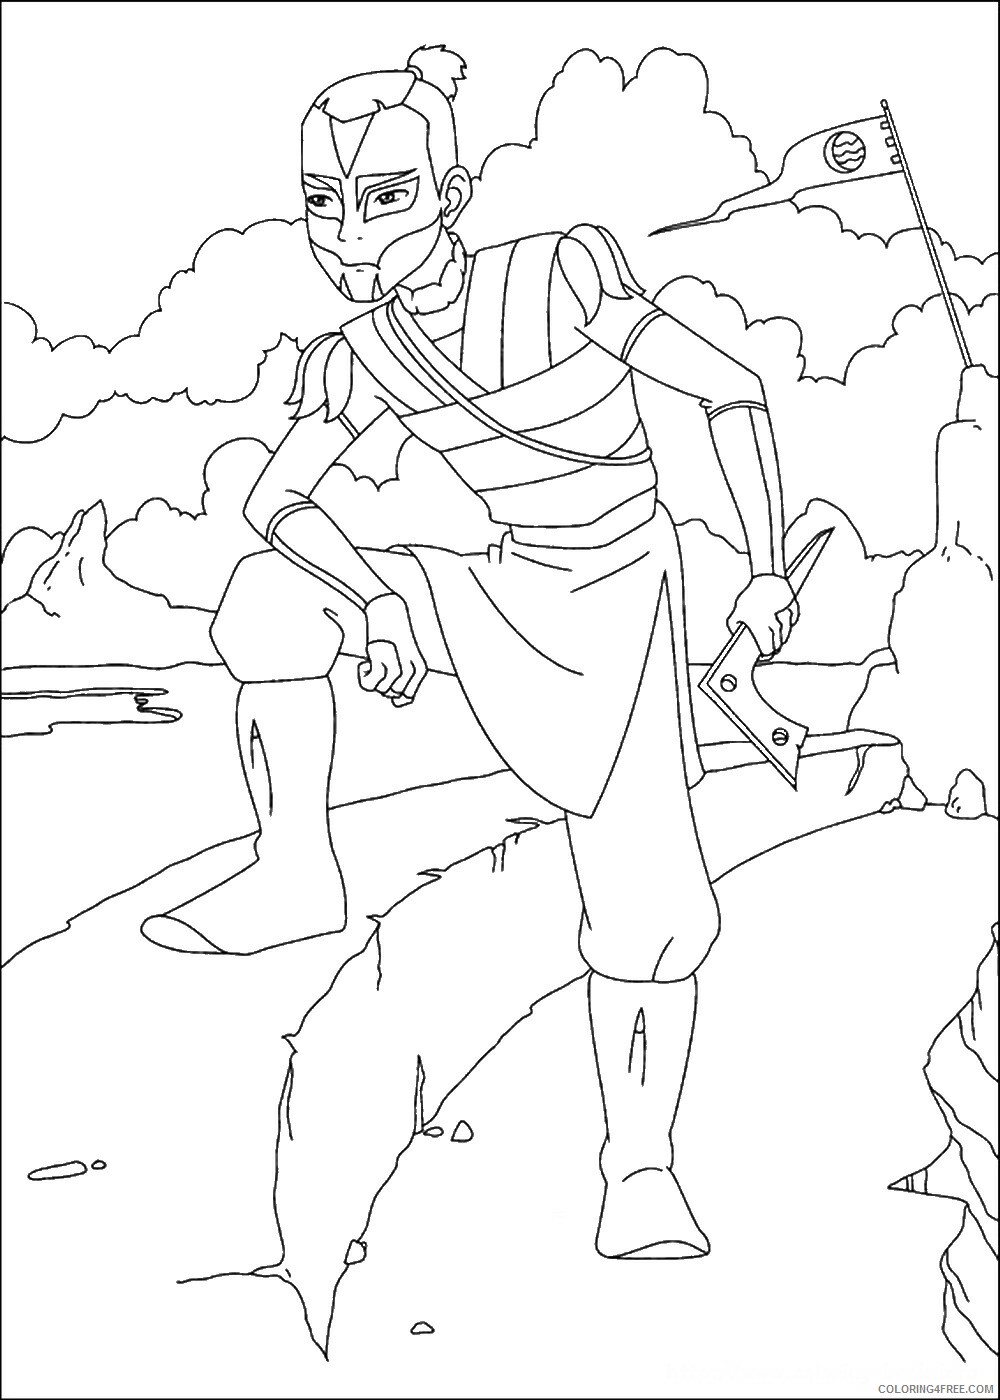 Avatar the Last Airbender Coloring Pages TV Film avatar_cl103 Printable 2020 00262 Coloring4free